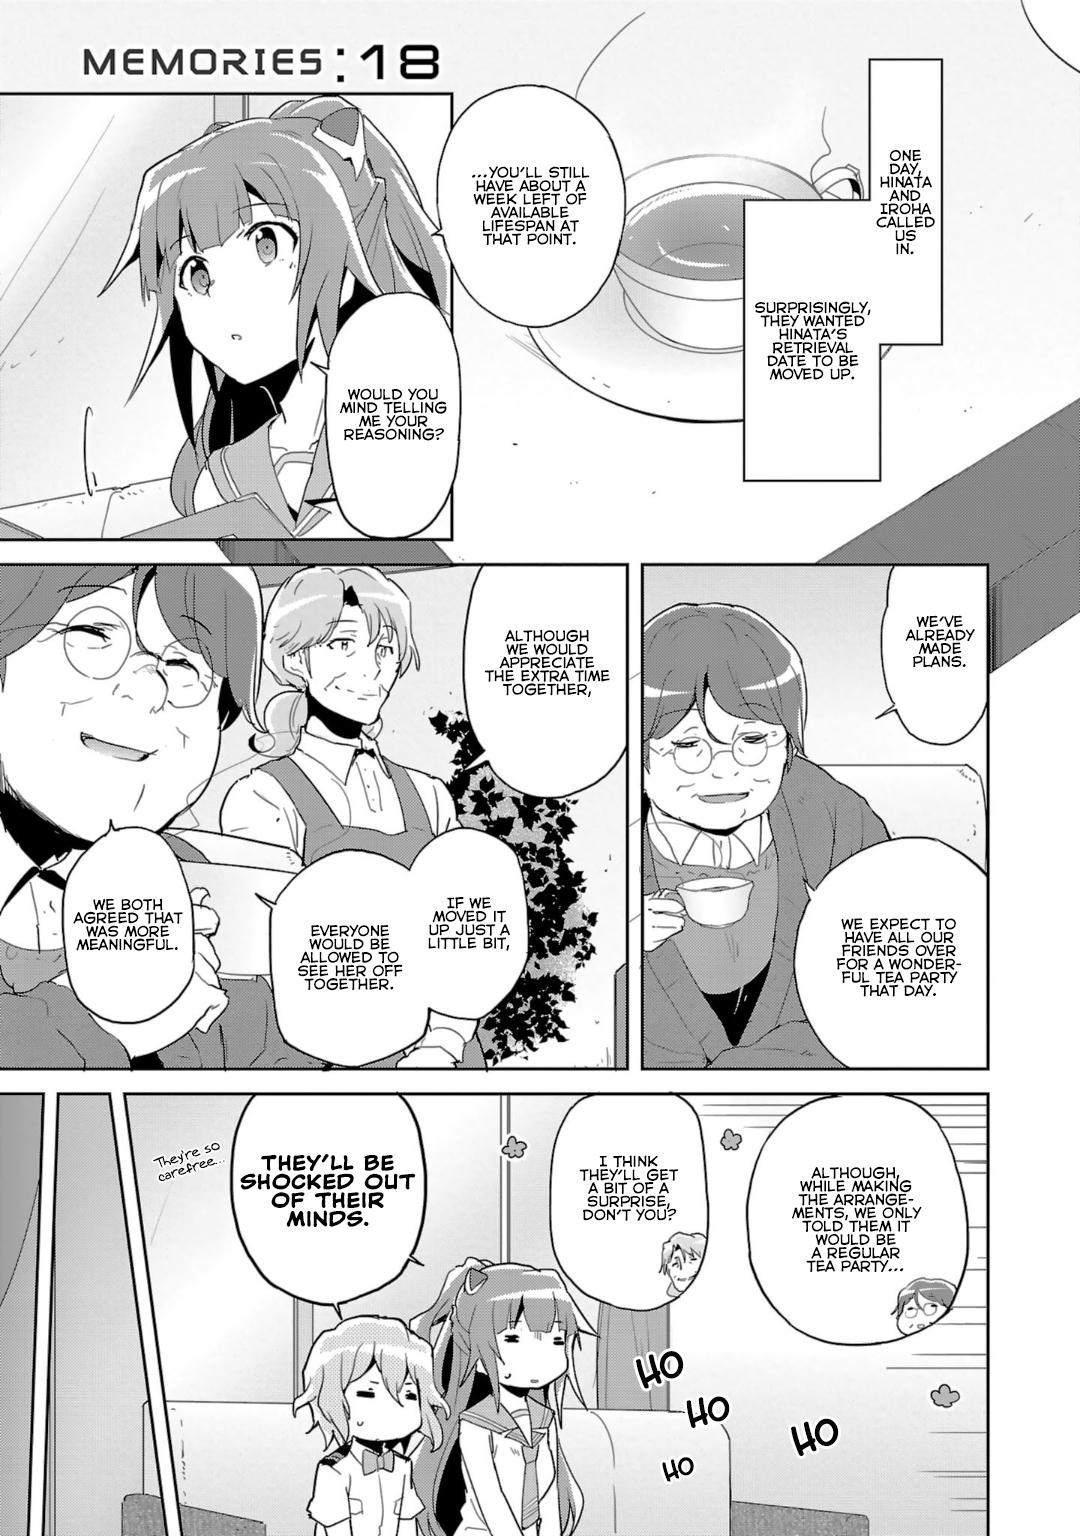 Plastic Memories: Say to good-bye Ch.12 Page 5 - Mangago